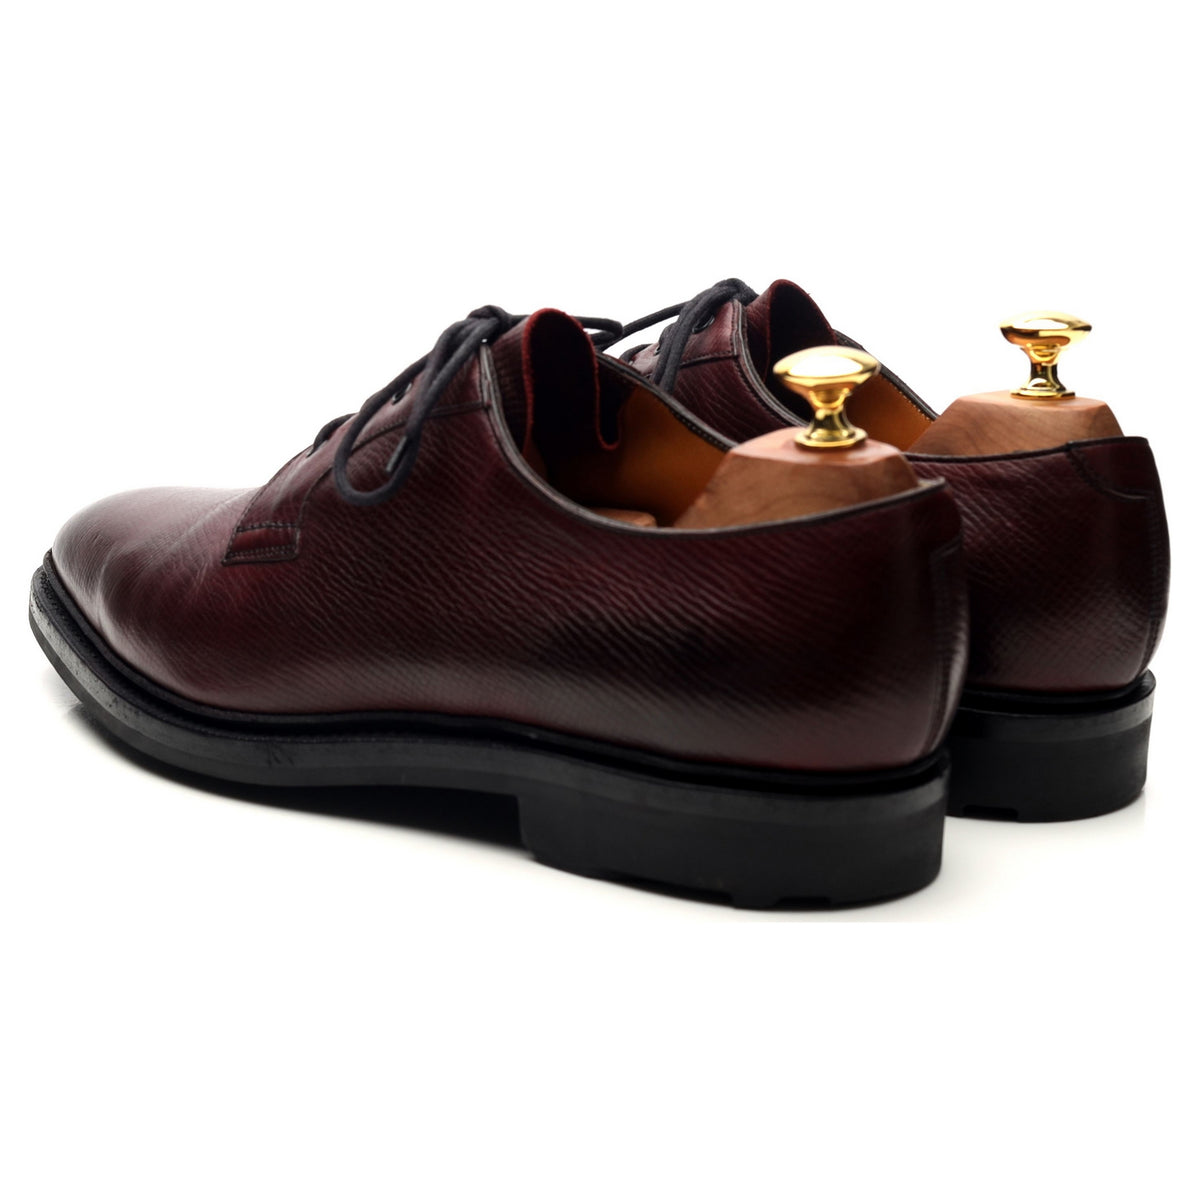 'Caudale' Burgundy Leather Derby UK 9 E - Abbot's Shoes